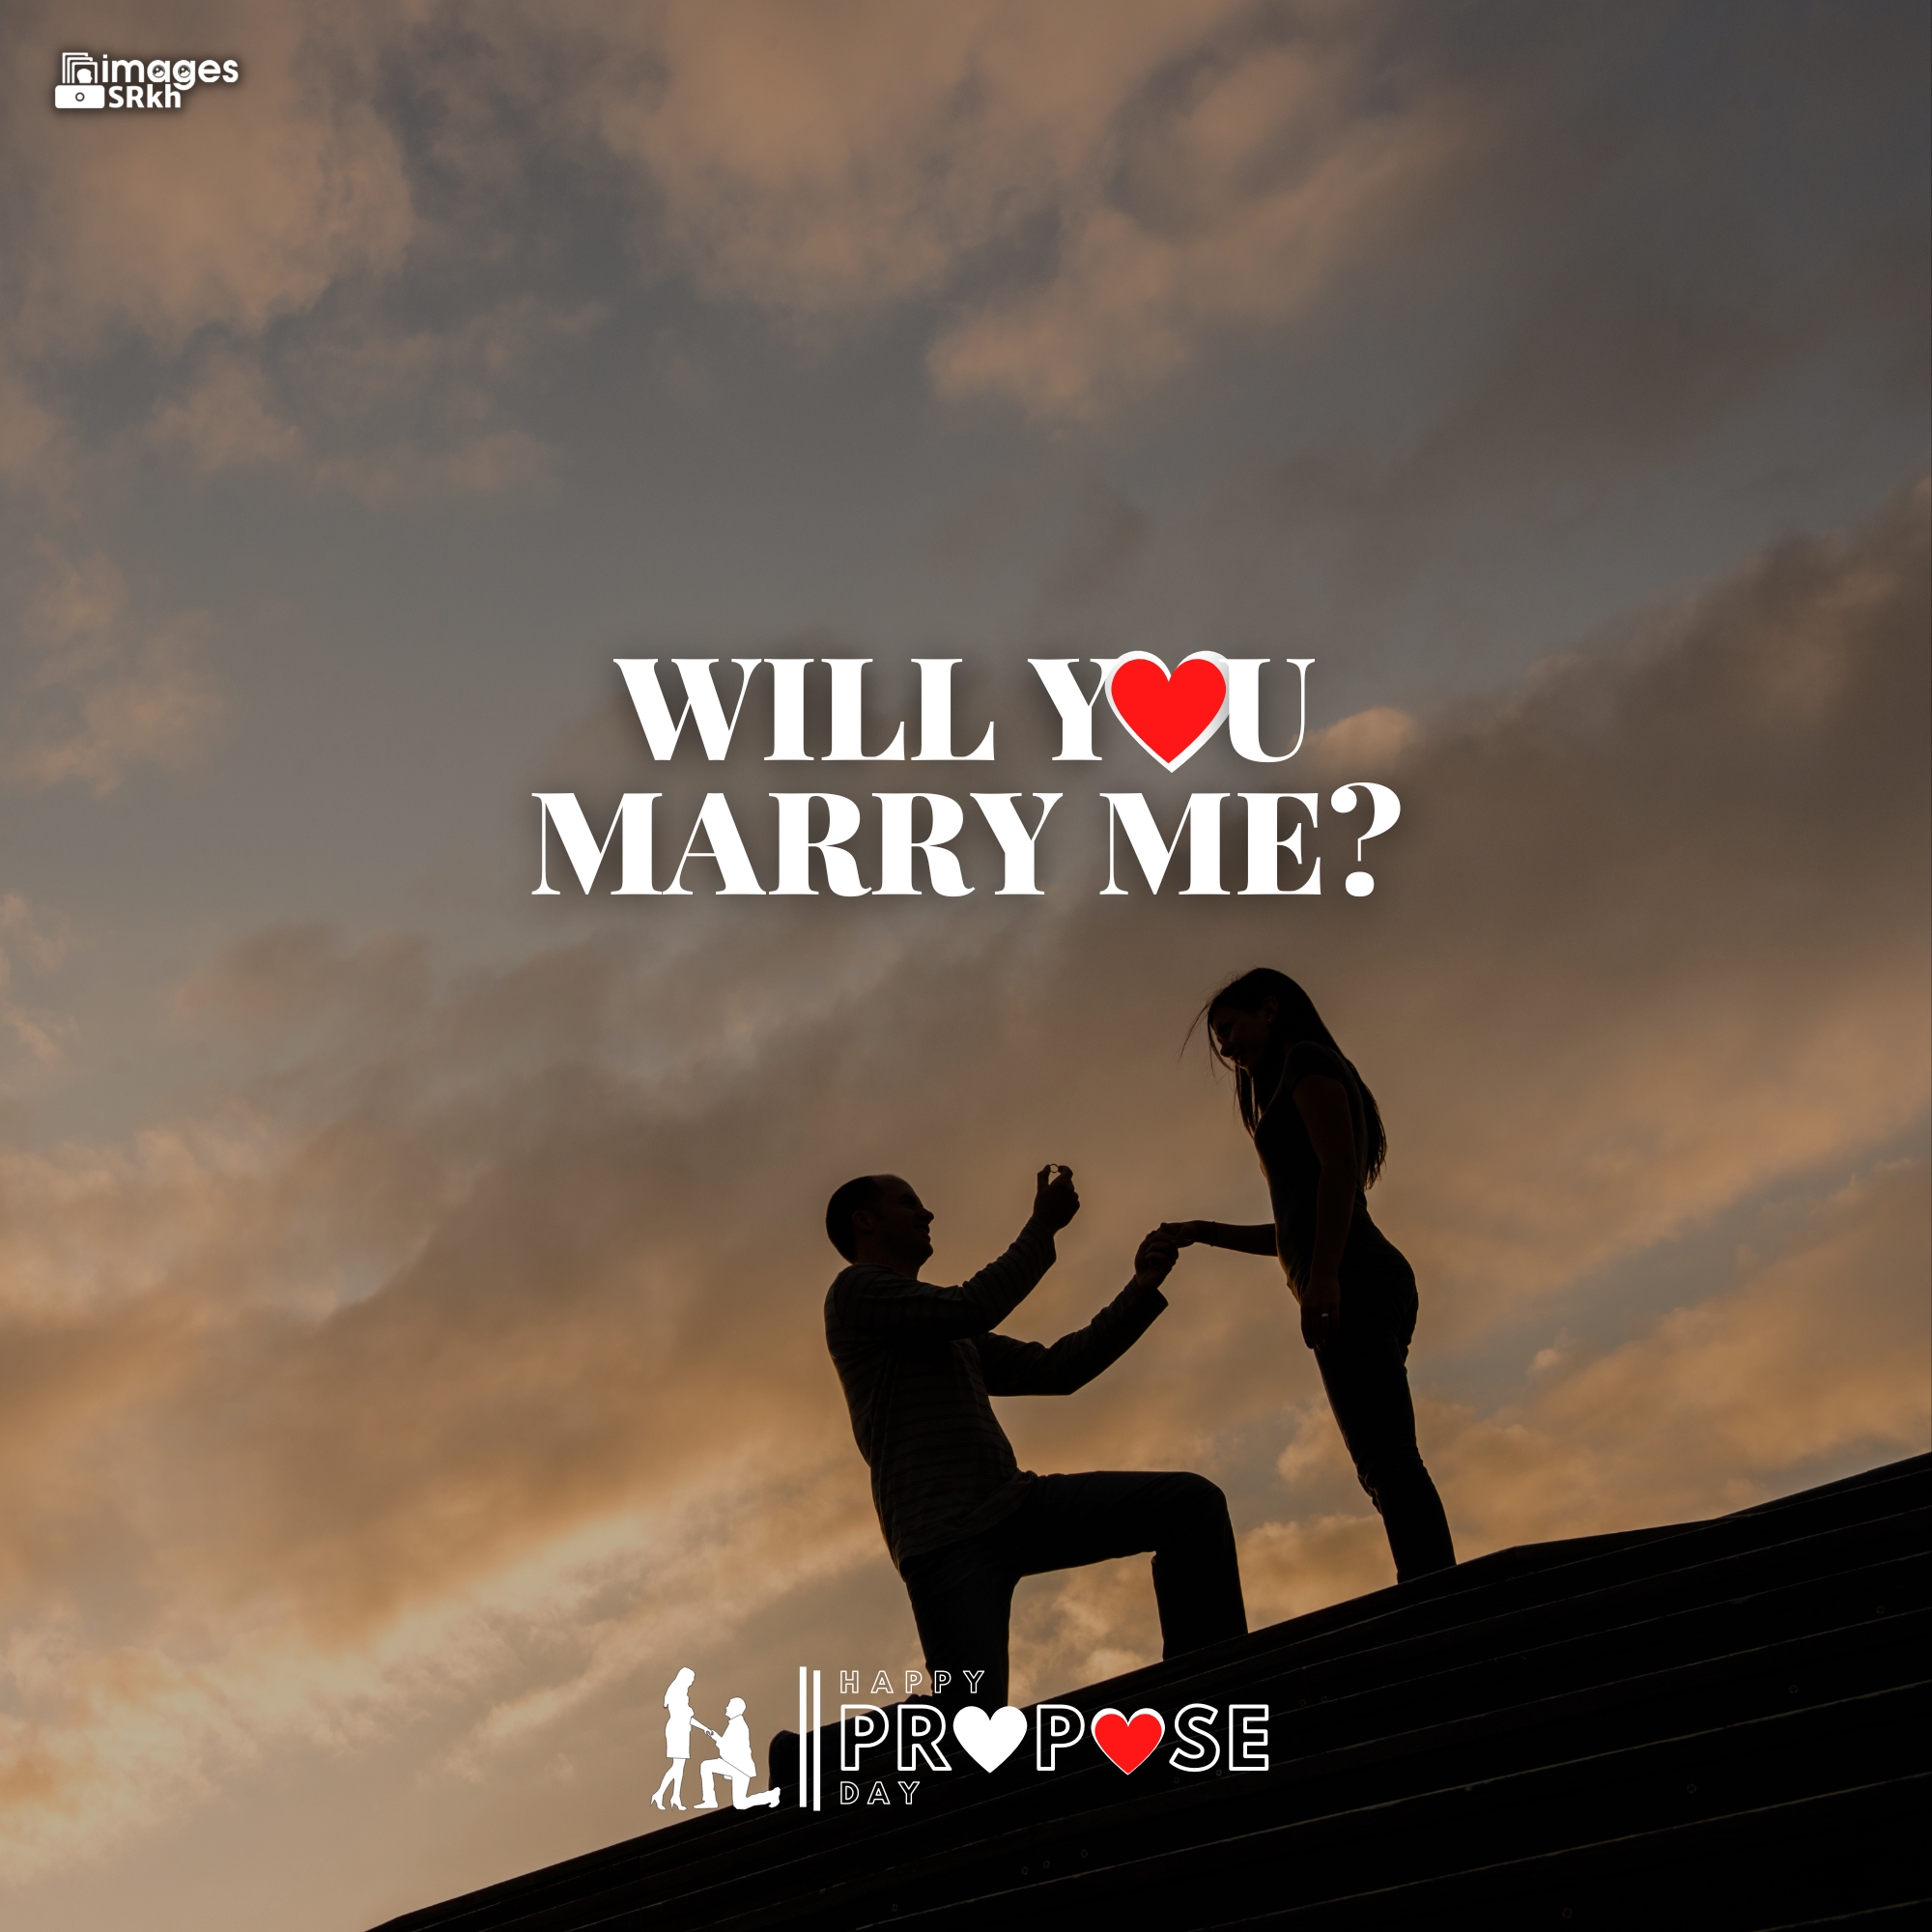 Propose Day Images | 288 | Will You MARRY ME